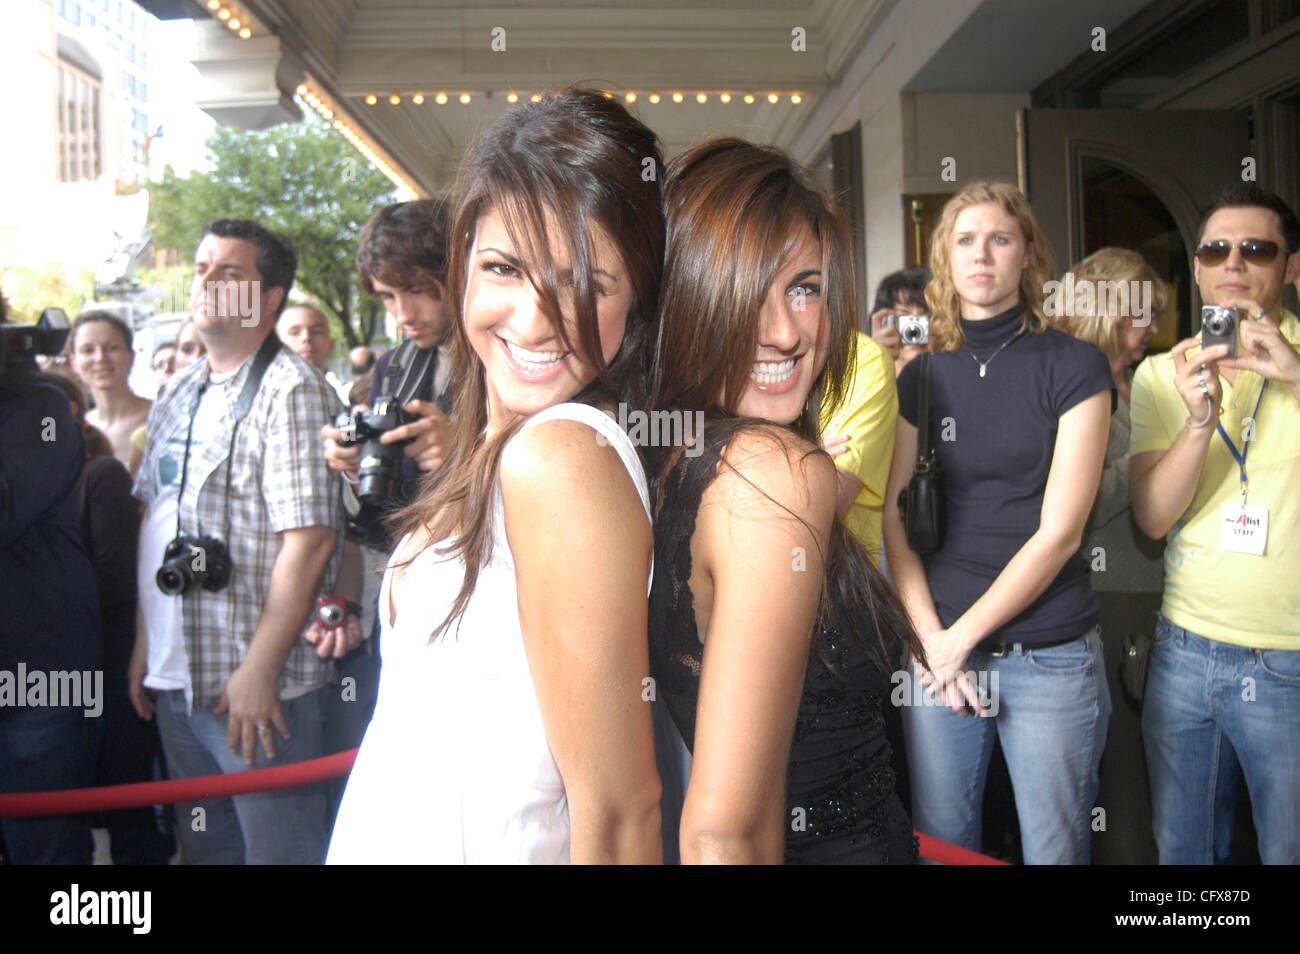 Mar 28, 2007 - Austin, TX, USA - ELECTRA and ELISE AVELLAN (R) at the premiere of 'Grindhouse' held at Austin's Paramount Theatre. 'Grindhouse' is composed of two full-length films. Austin filmmaker Robert Rodriguez wrote and directed zombie thriller 'Planet Terror,' starring Rose McGowan. Quentin T Stock Photo